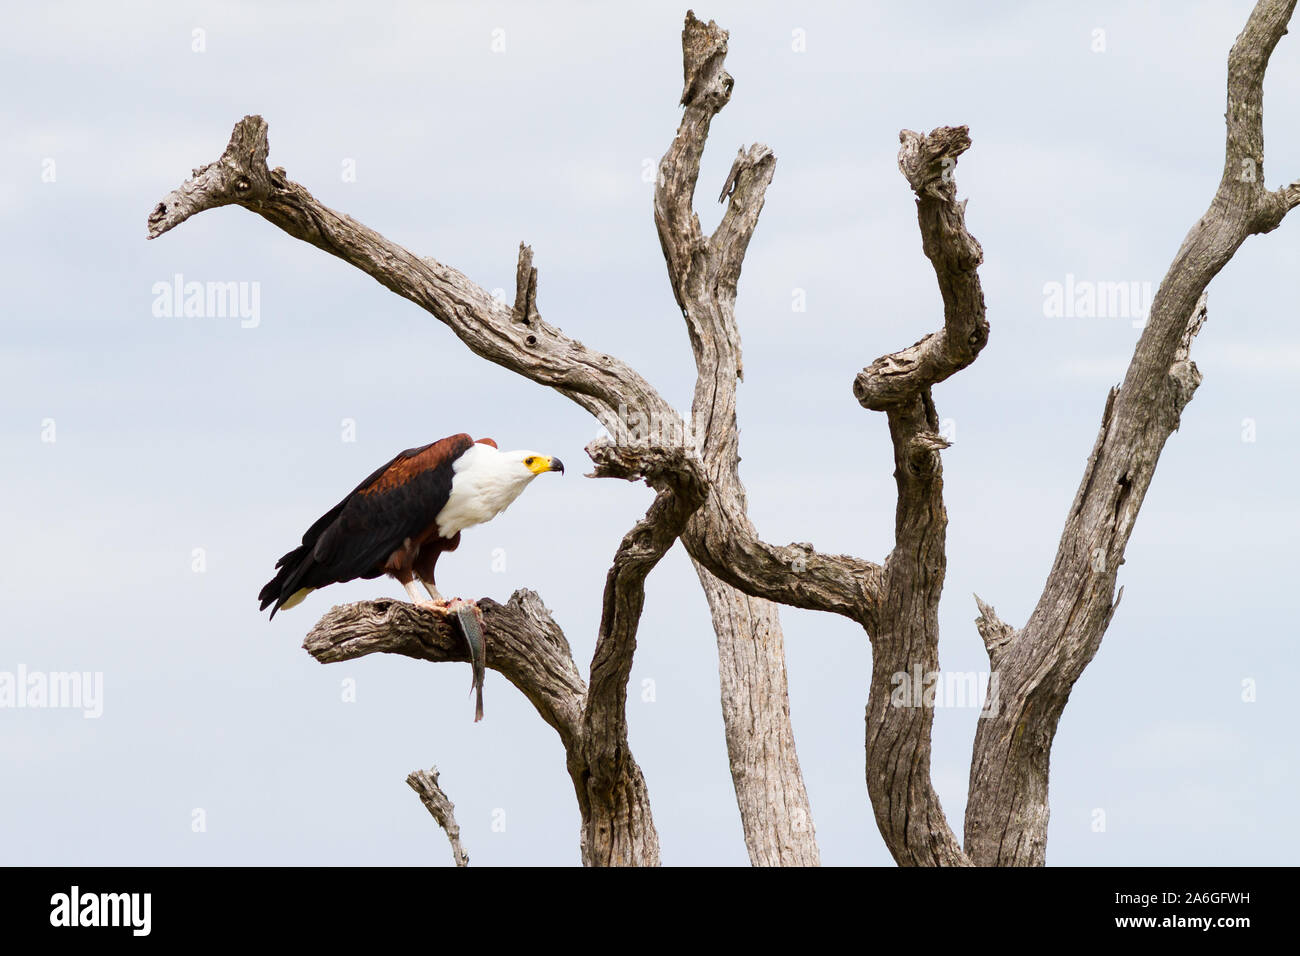 An African fish-eagle takes time out from eating a freshly caught fish to seemingly stare at the anthropomorphic shapes construed around it in the dried trees. Stock Photo